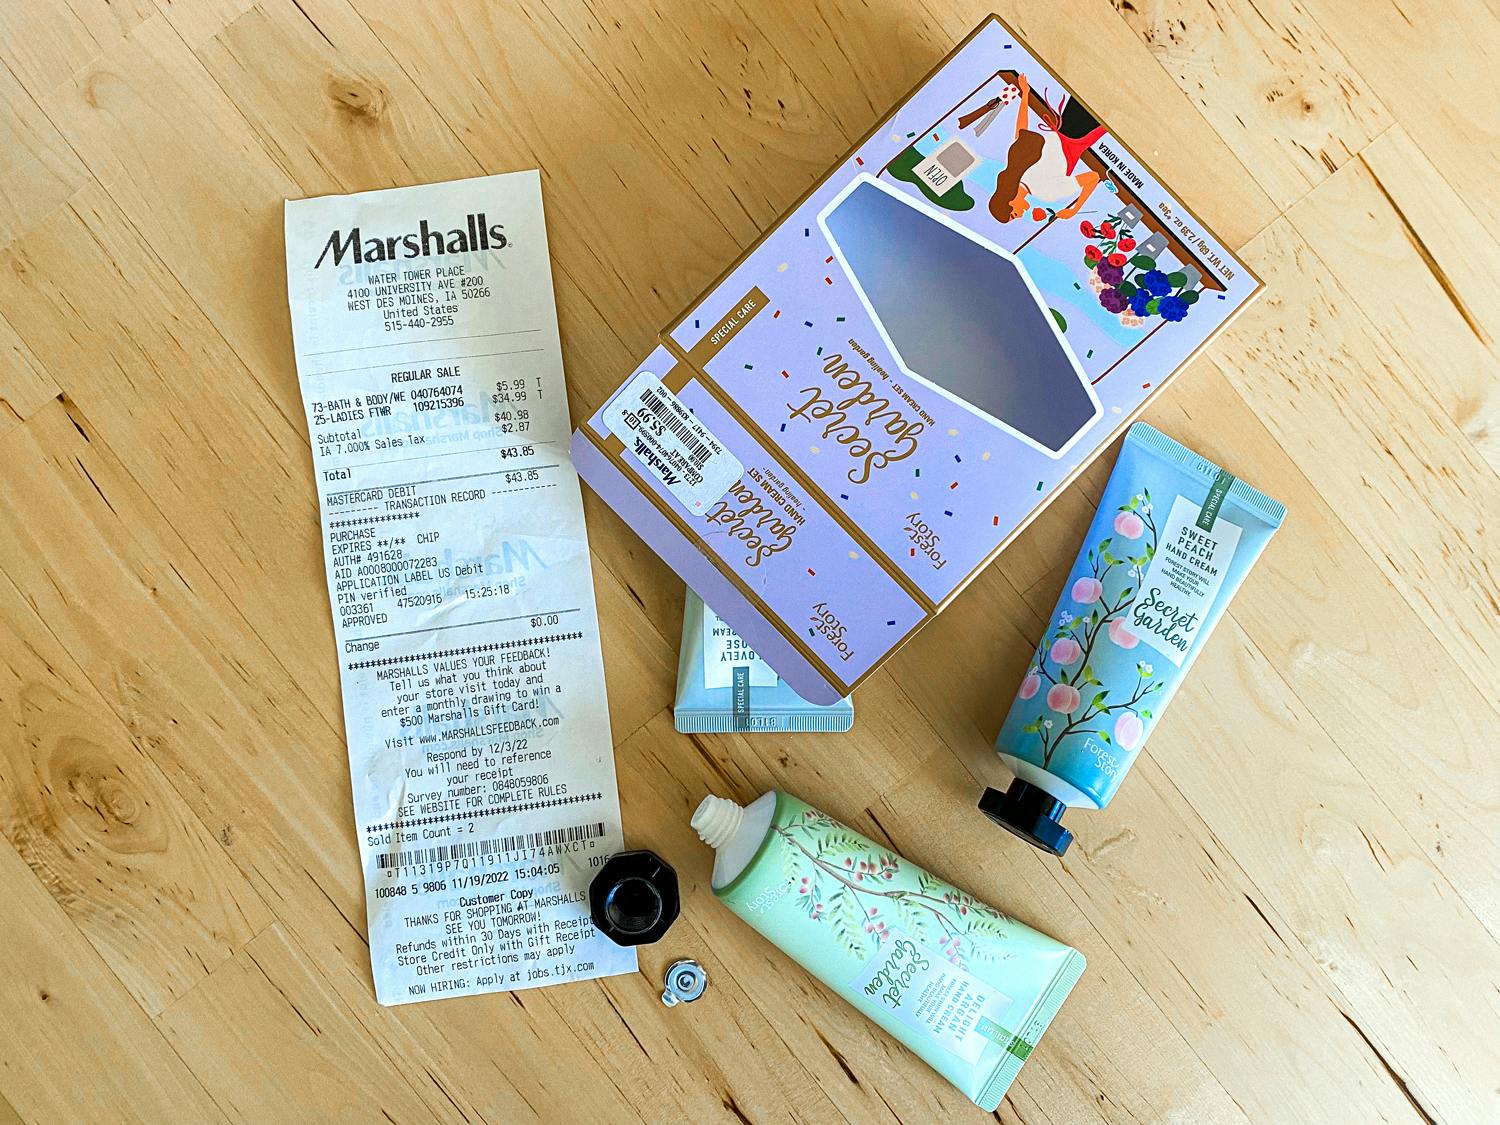 marshalls receipt and opened beauty product